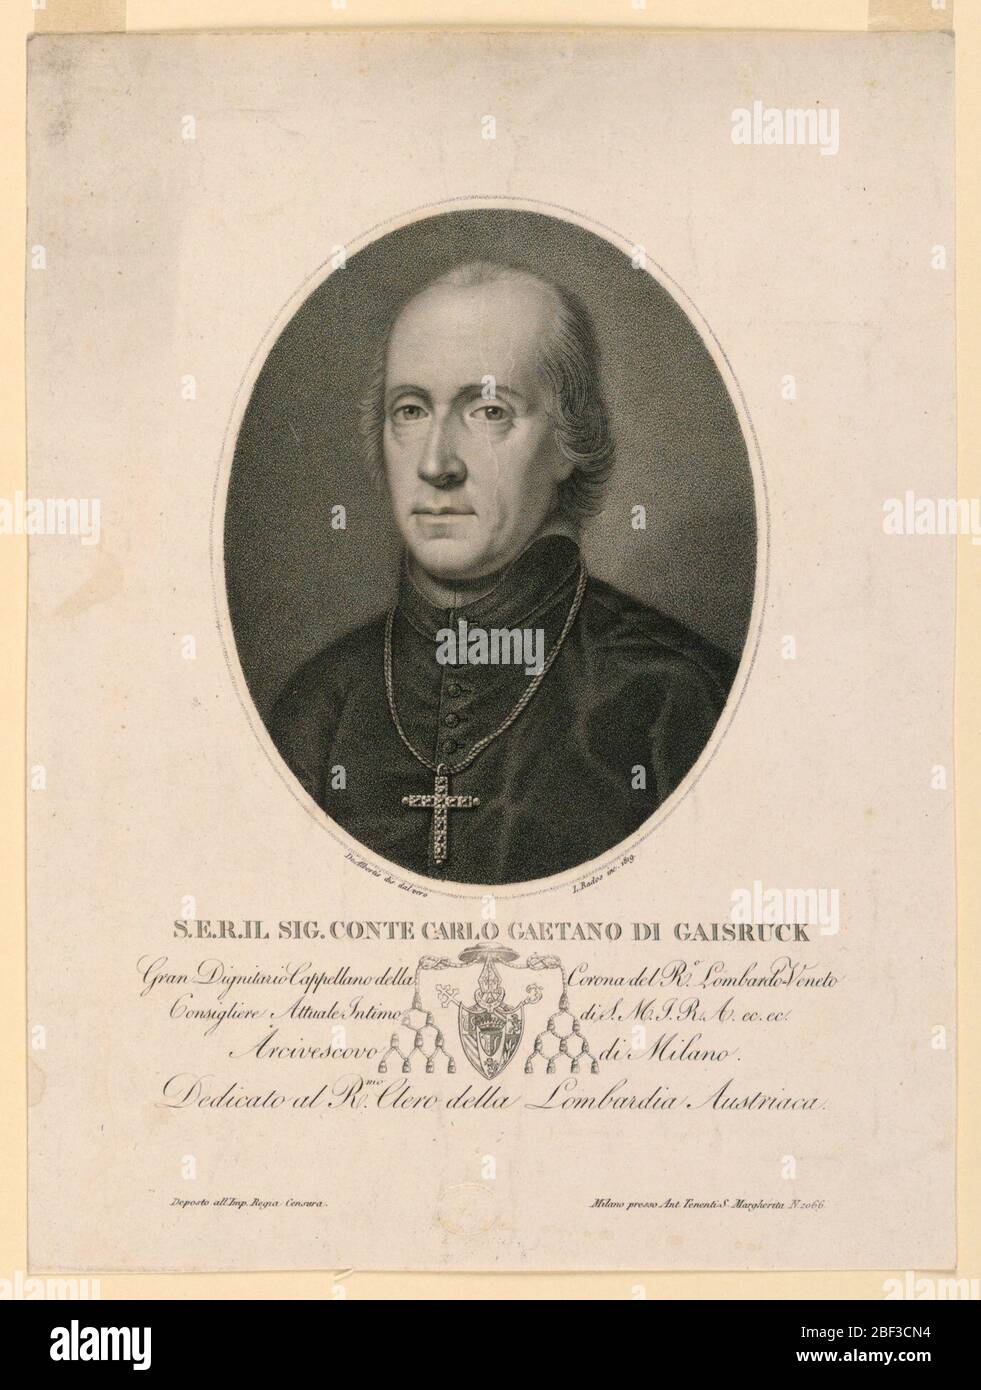 Portrait of Count Carlo Gaetano di Gaisruck. Half-length portrait in three-quarter view towards left. The sitter is bareheaded and wearing a clerical robe with a cross. Stock Photo